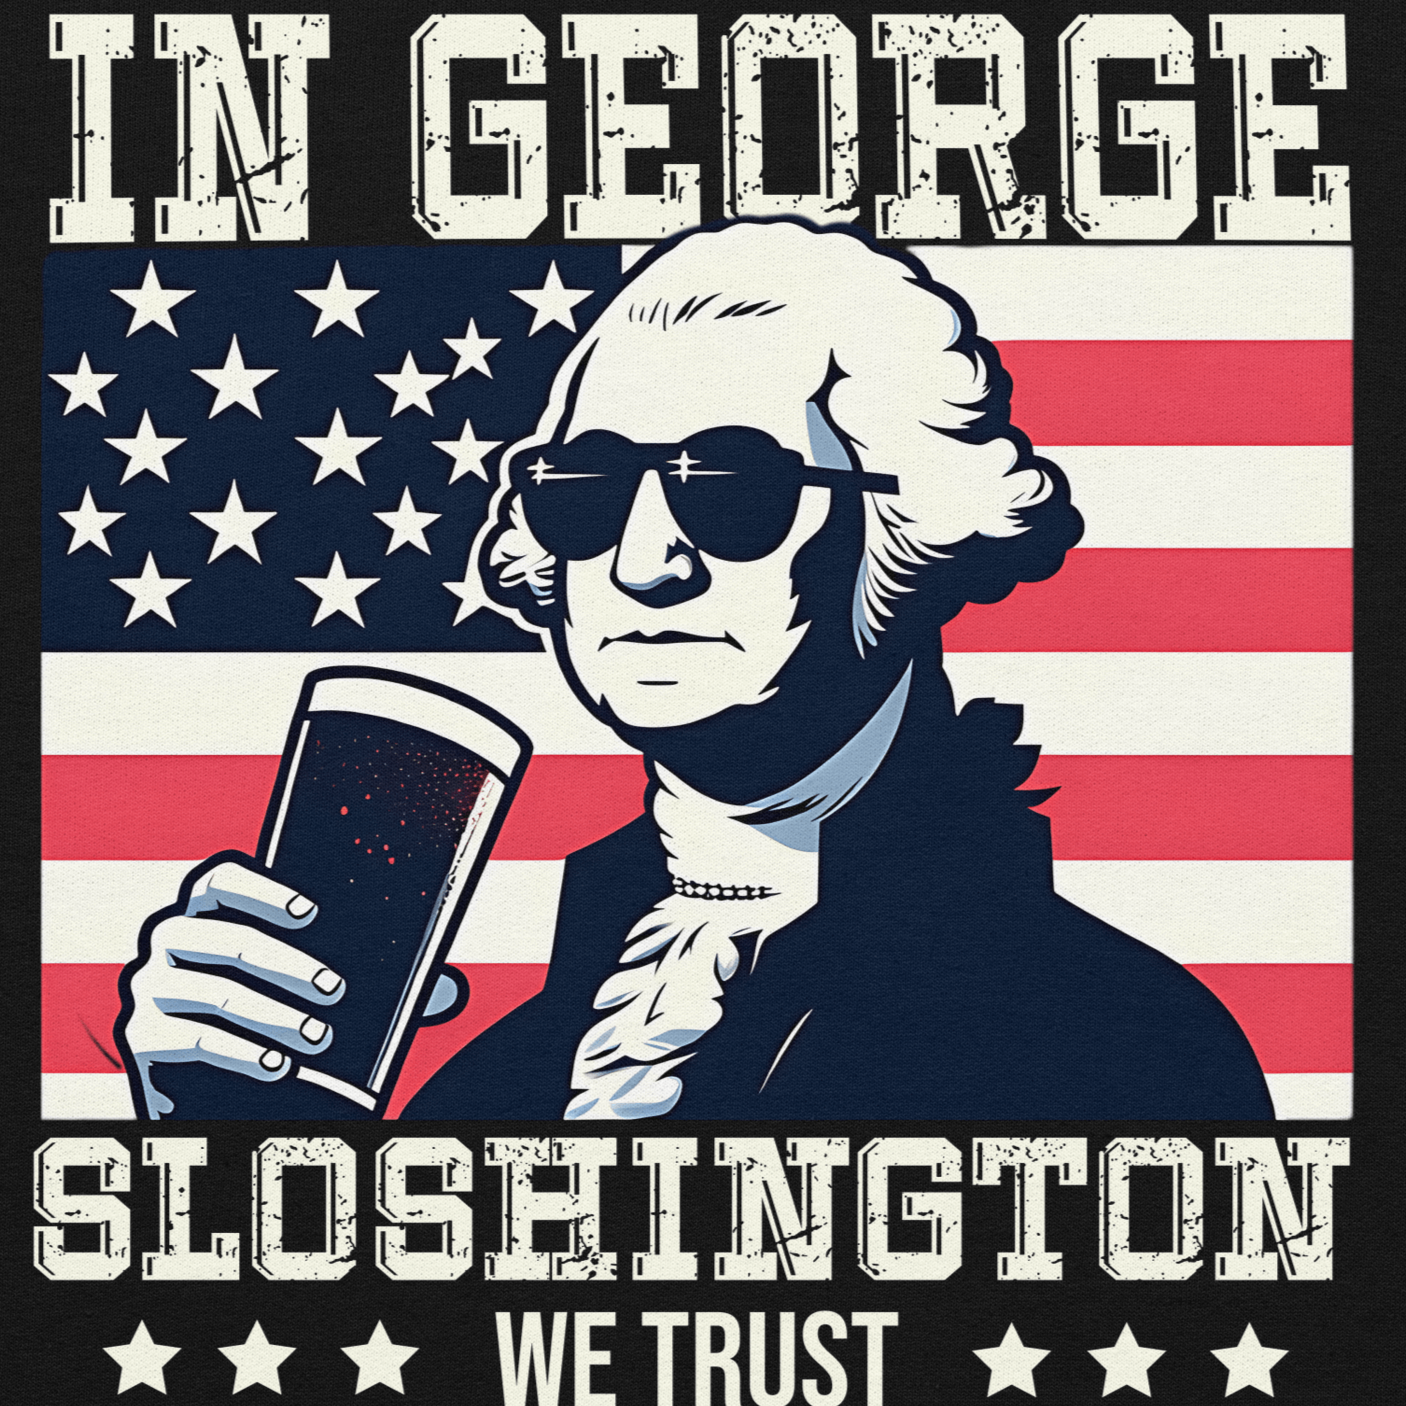 Hoodie with In George Sloshington We Trust text, image of George Washington drinking a beer, and distressed American flag background. Perfect for 4th of July.